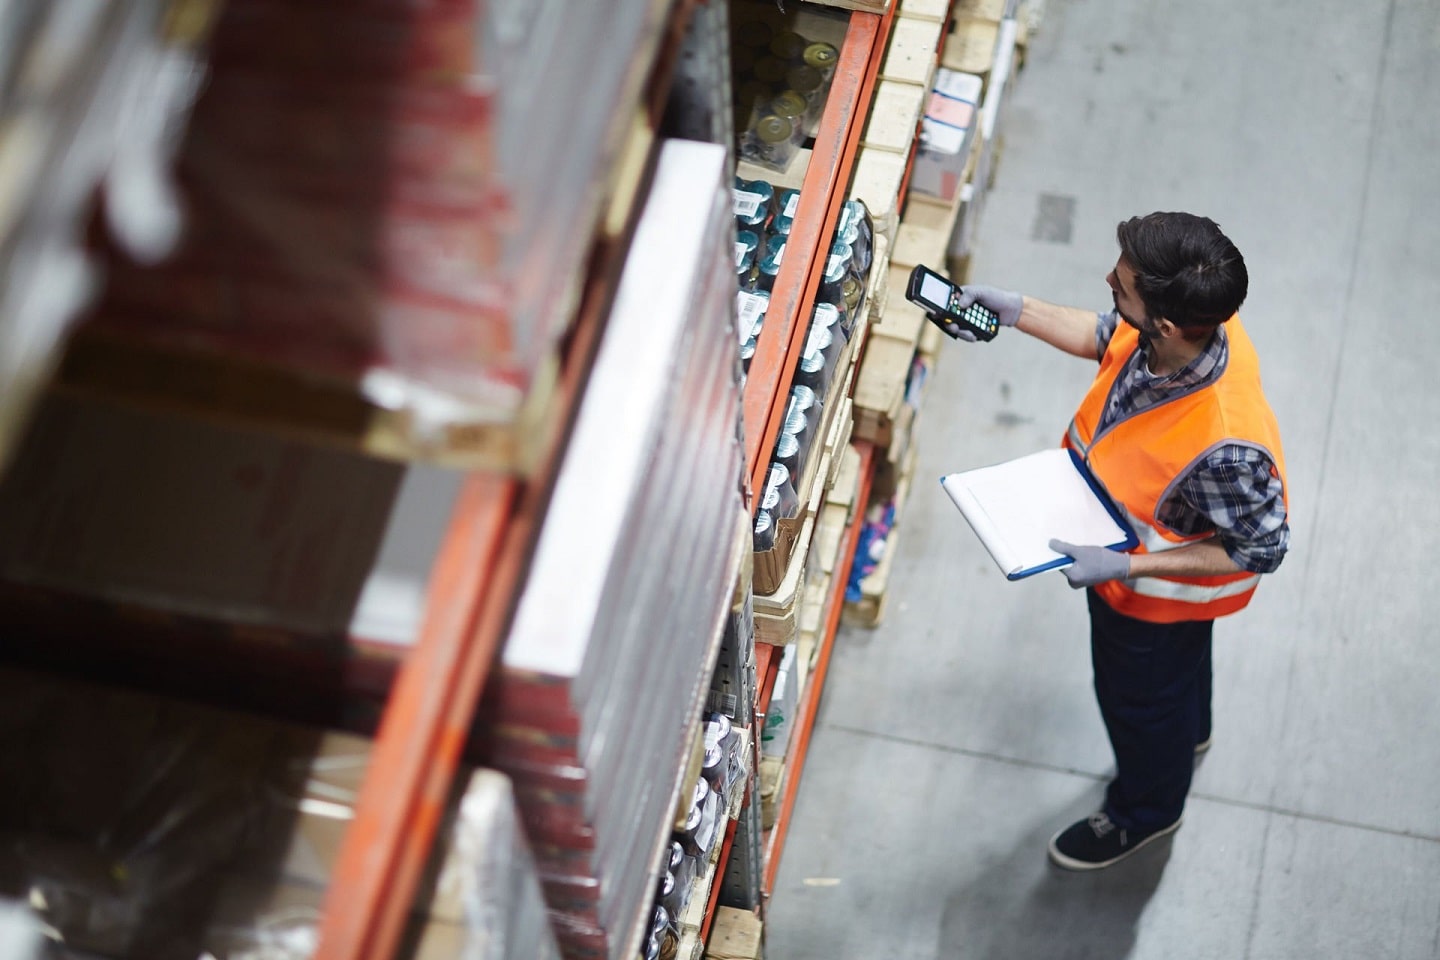 Manage threats to your supply chain